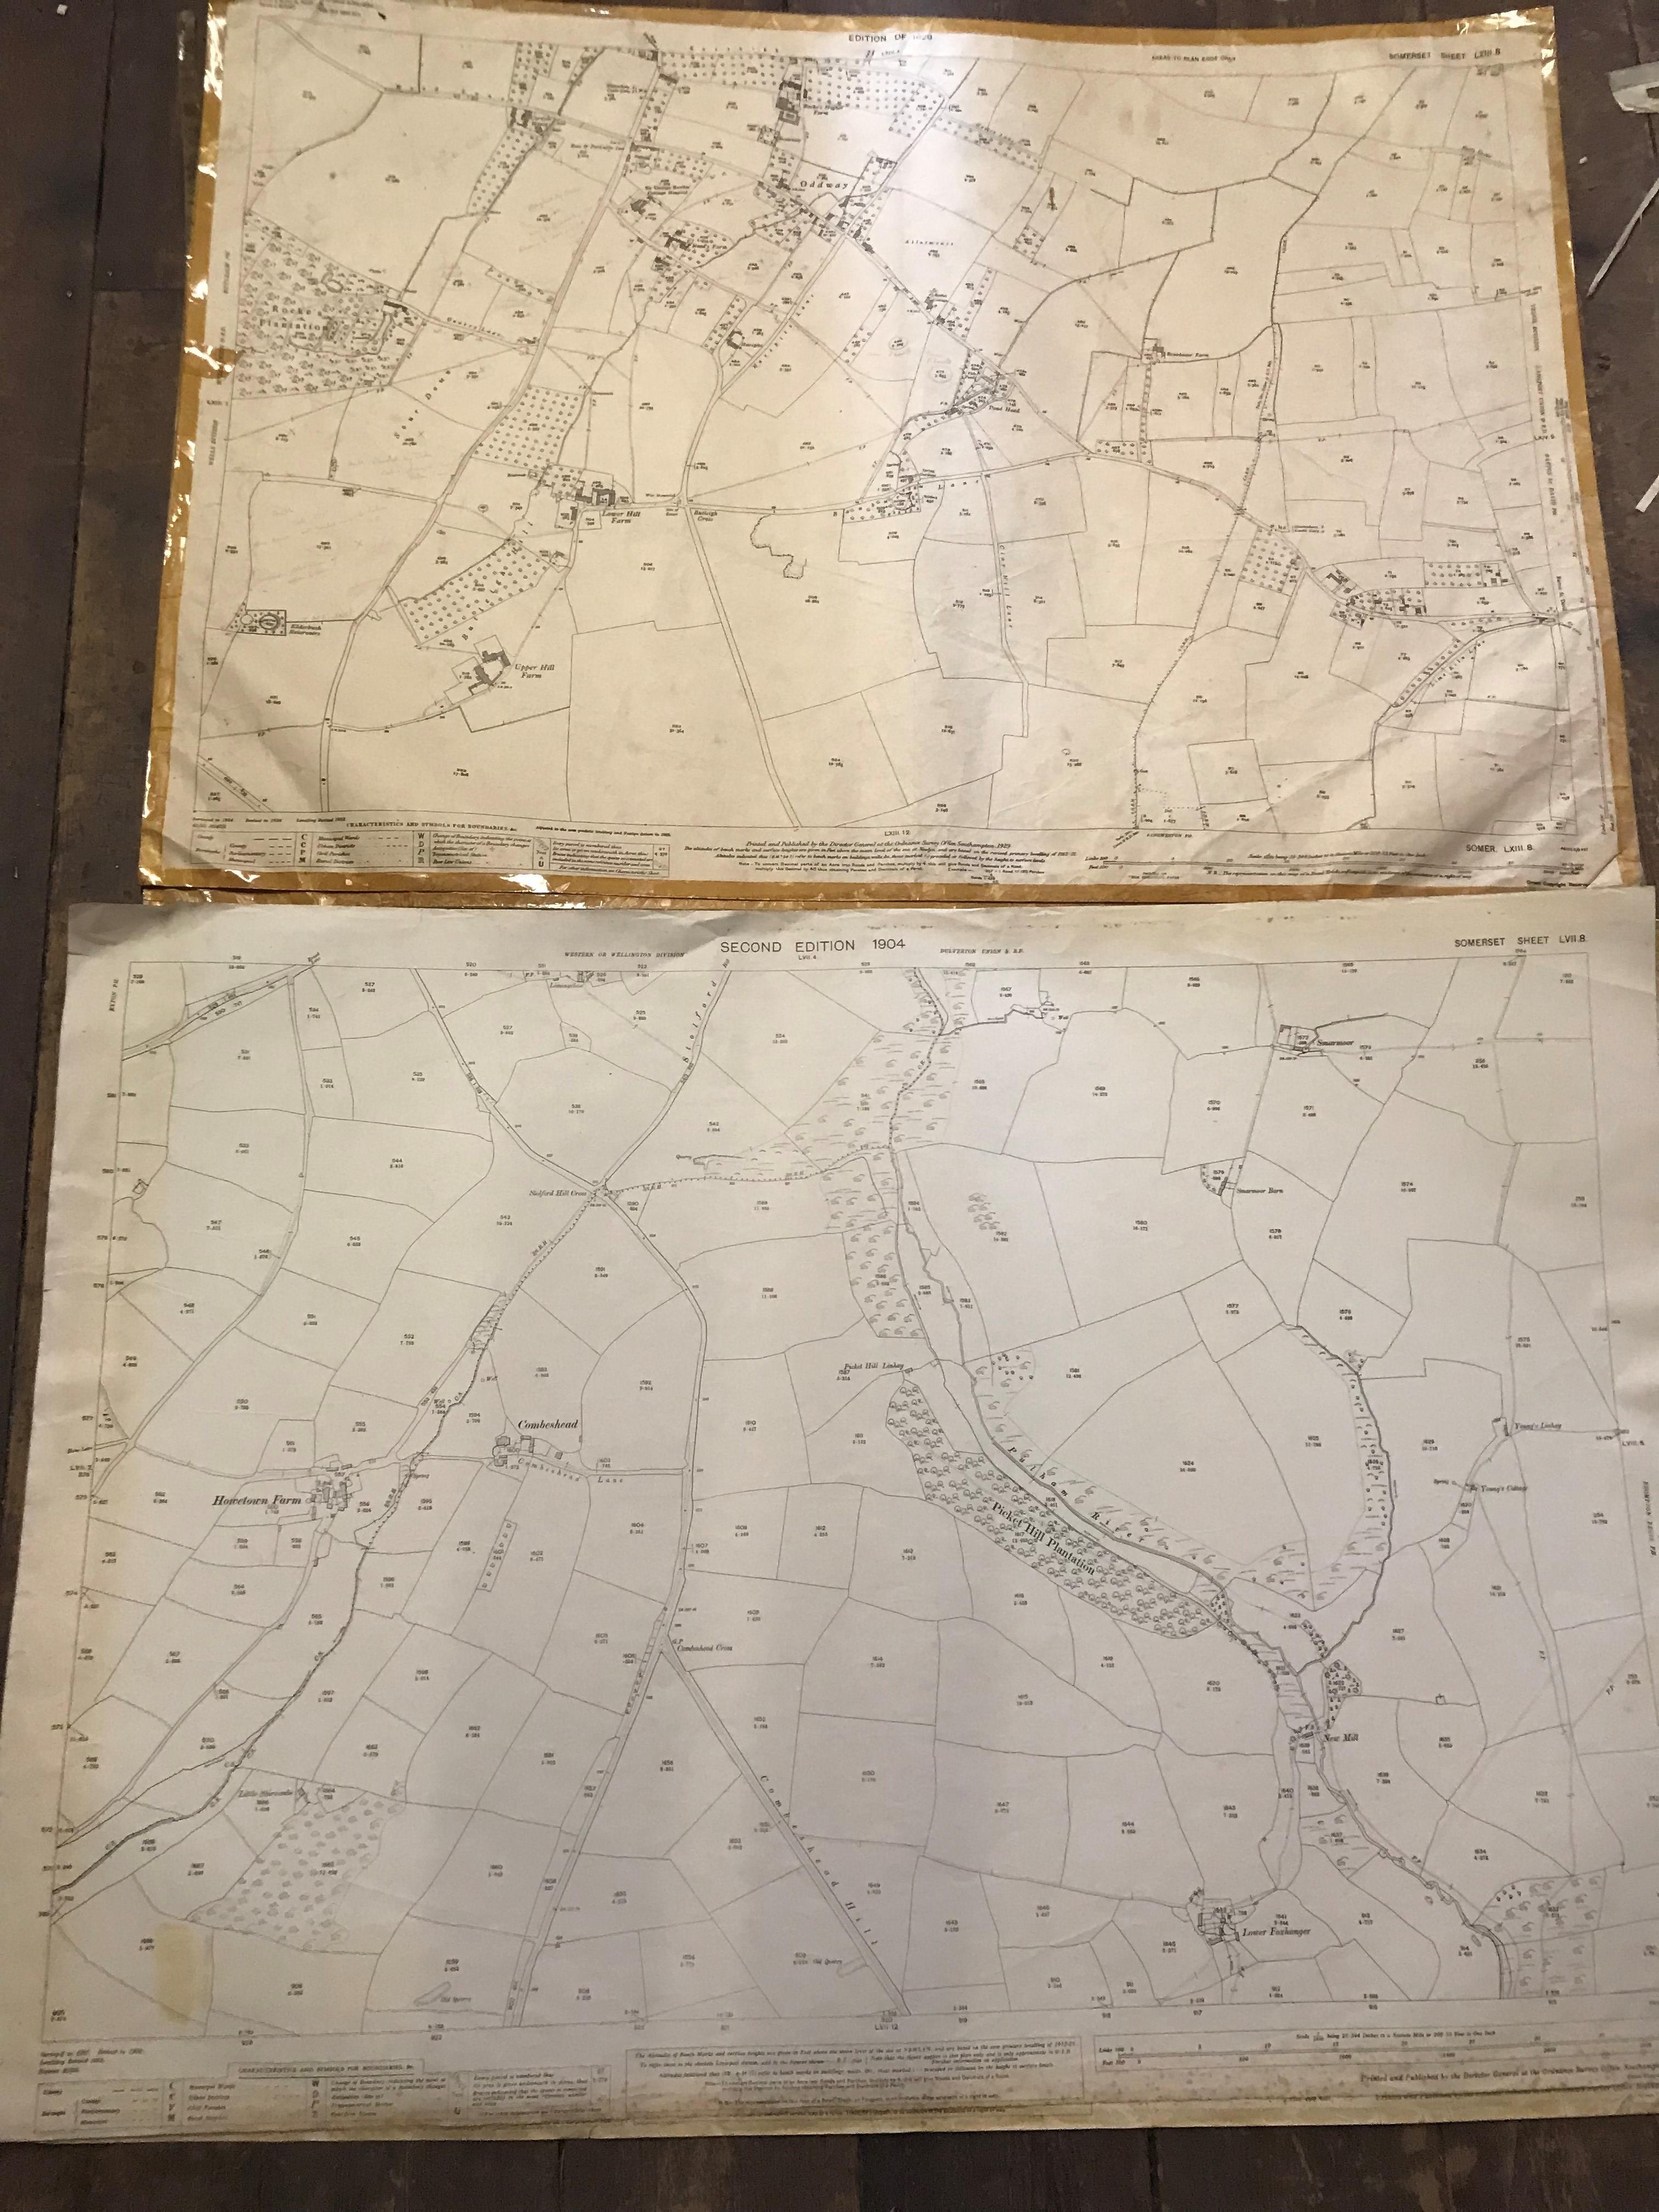 COLLECTION OF THIRTY 1:2500 ORDNANCE SURVEY MAPS covering Drimpton; Uffculme; Butleigh; Elworthy; - Image 14 of 16